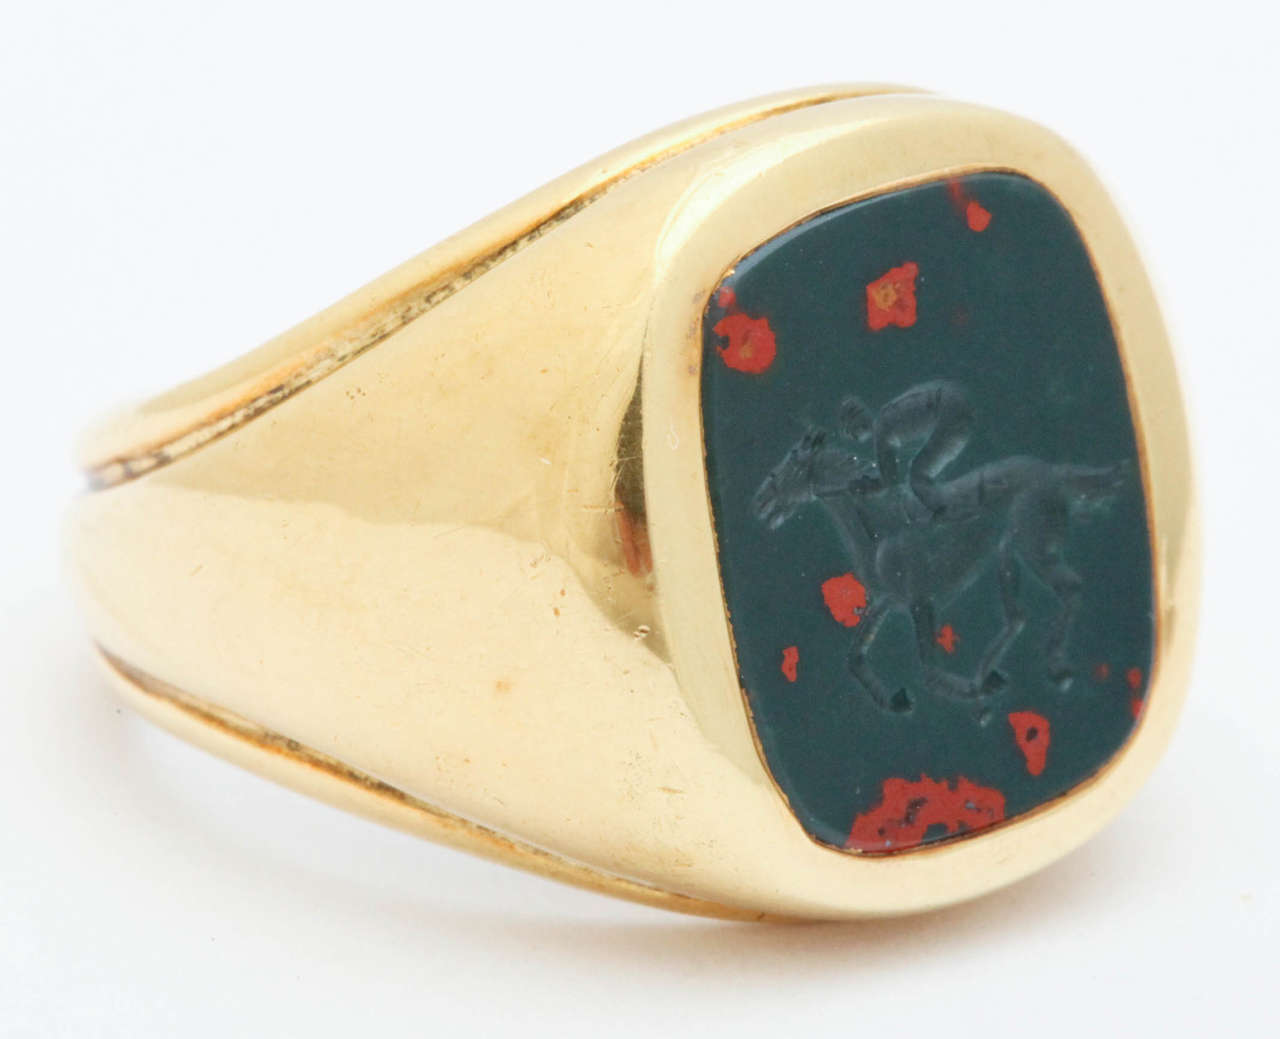 18K Bloodstone Intaglio Ring Depicting the King of Sports, Thoroughbred Racing. Bloodstone  is a Green Jasper Dotted with Bright Red Spots of Iron Oxide. 

The present ring size is  7 1/2.  It is a unisex ring and can be made in any size.